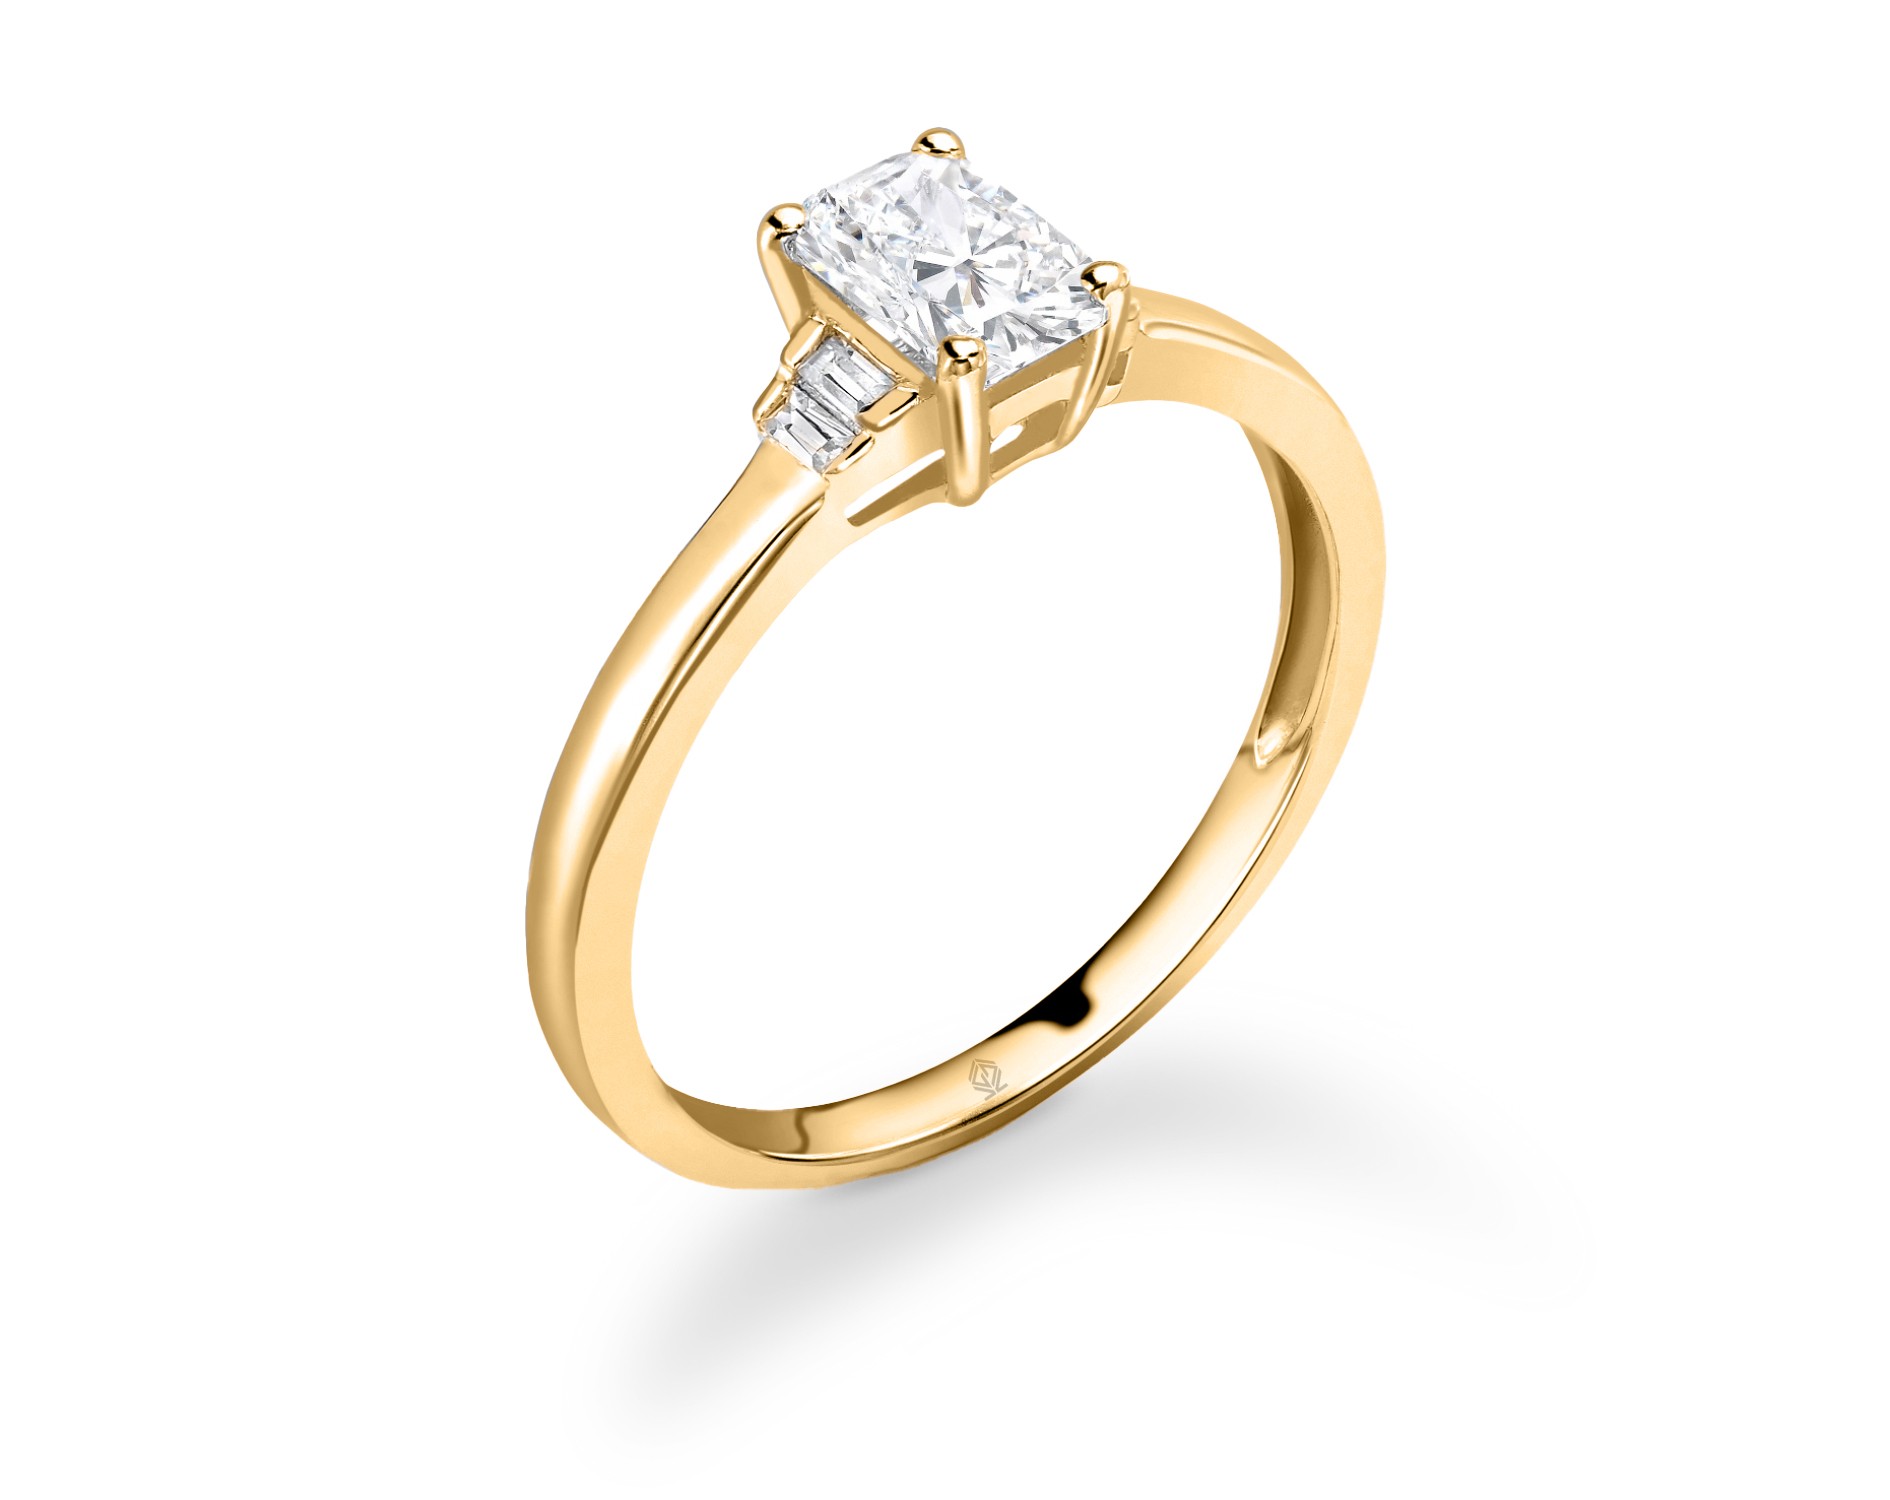 18K YELLOW GOLD RADIANT CUT DIAMOND RING WITH BAGUETTES CUT SIDE STONES